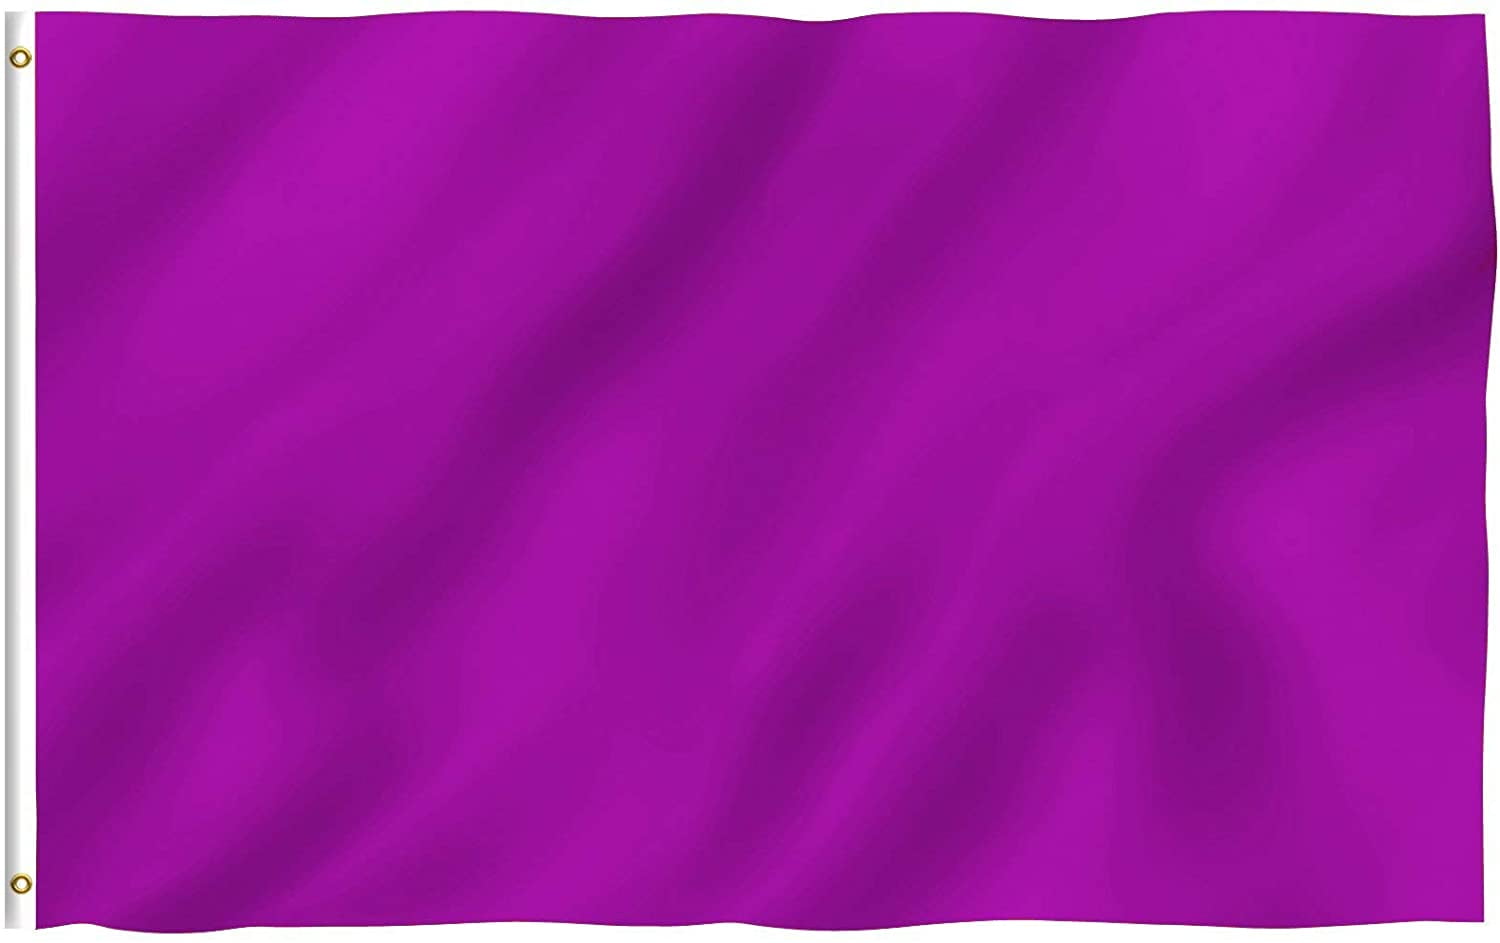 SOLID PURPLE 3'x5' FLAG WITH GROMMETS 3 FOOT X 5 FOOT POLYESTER INDOOR/OUTDOOR 